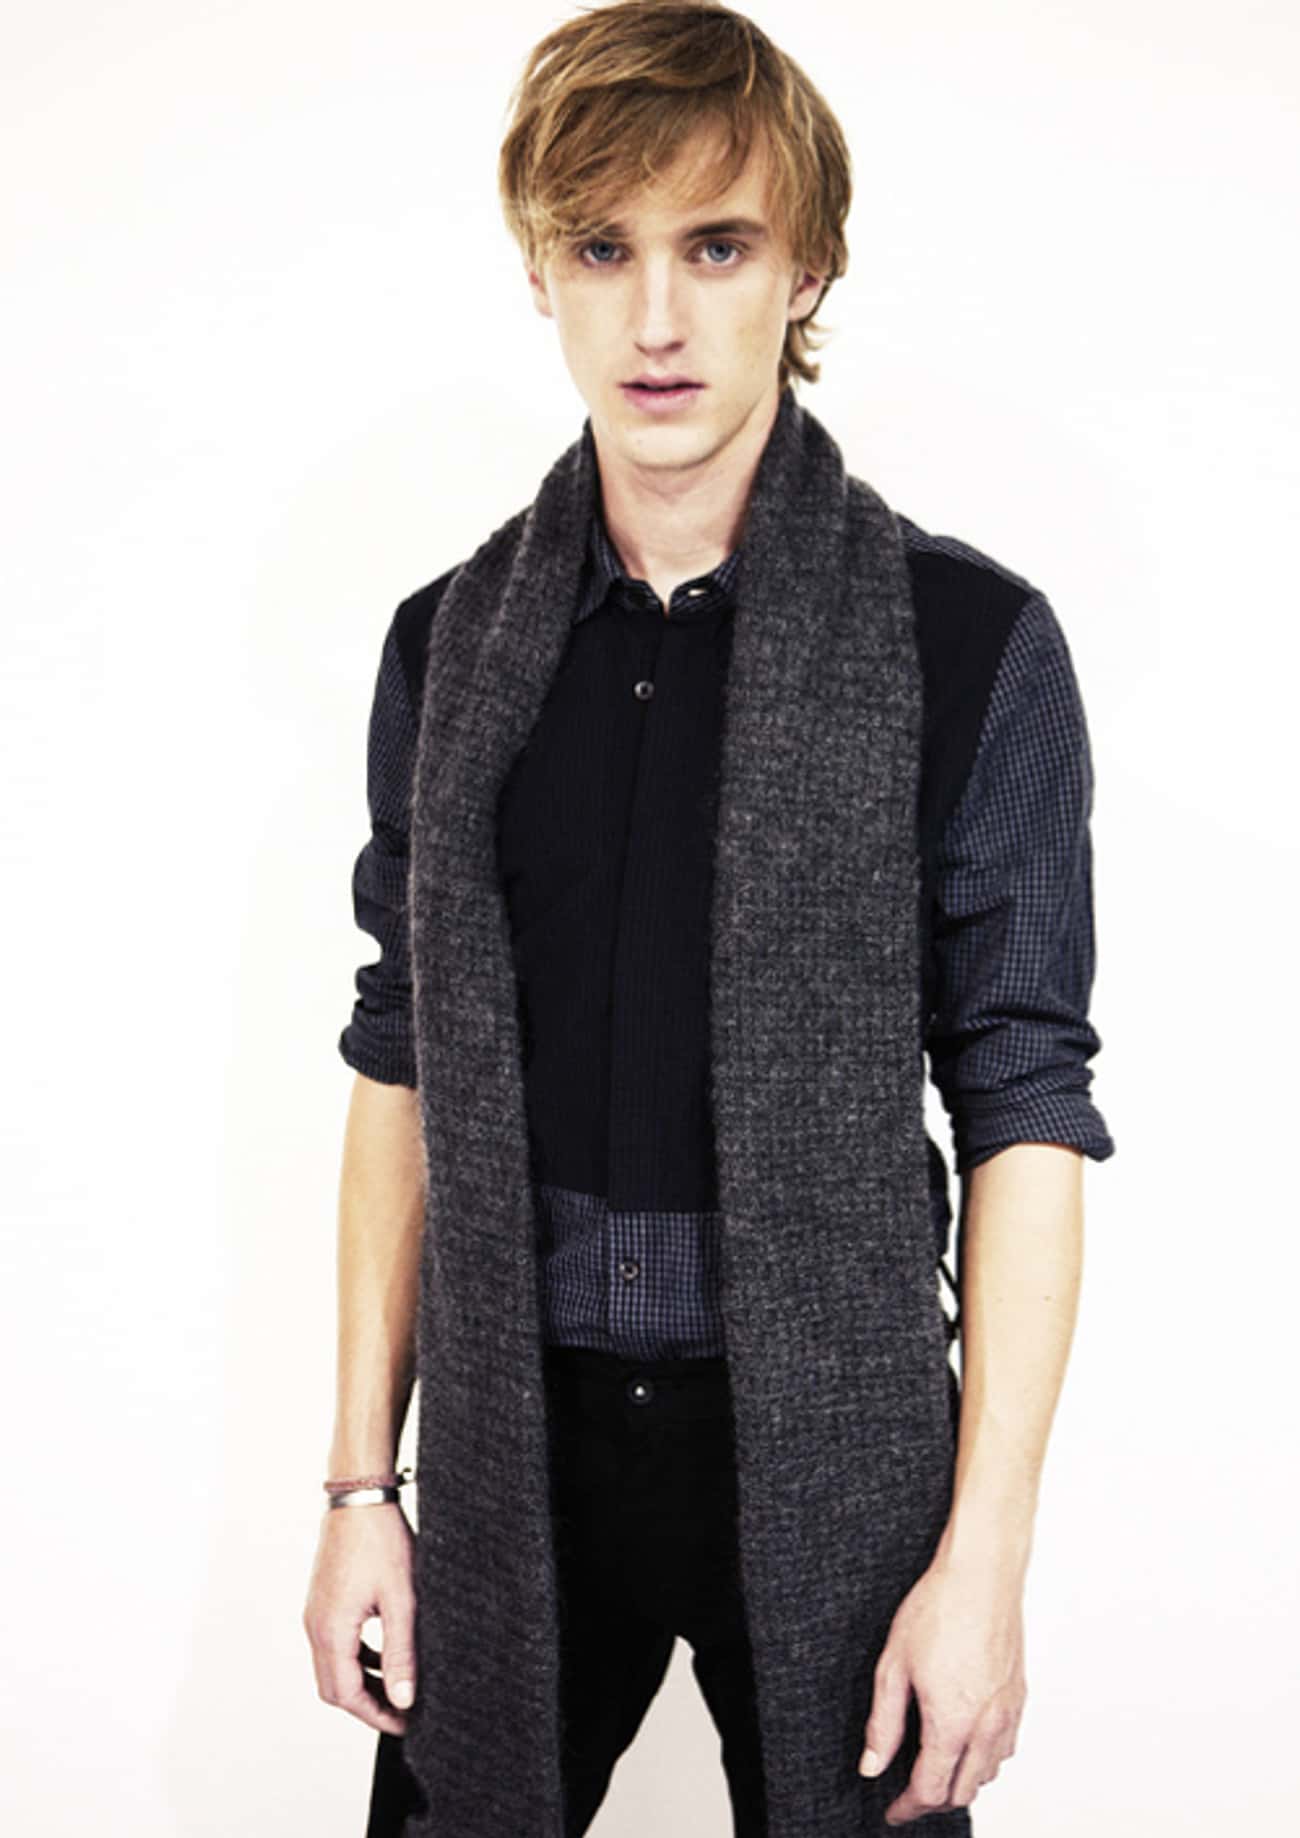 Tom Felton in Cropped Waistcoat with Knitted Scarf